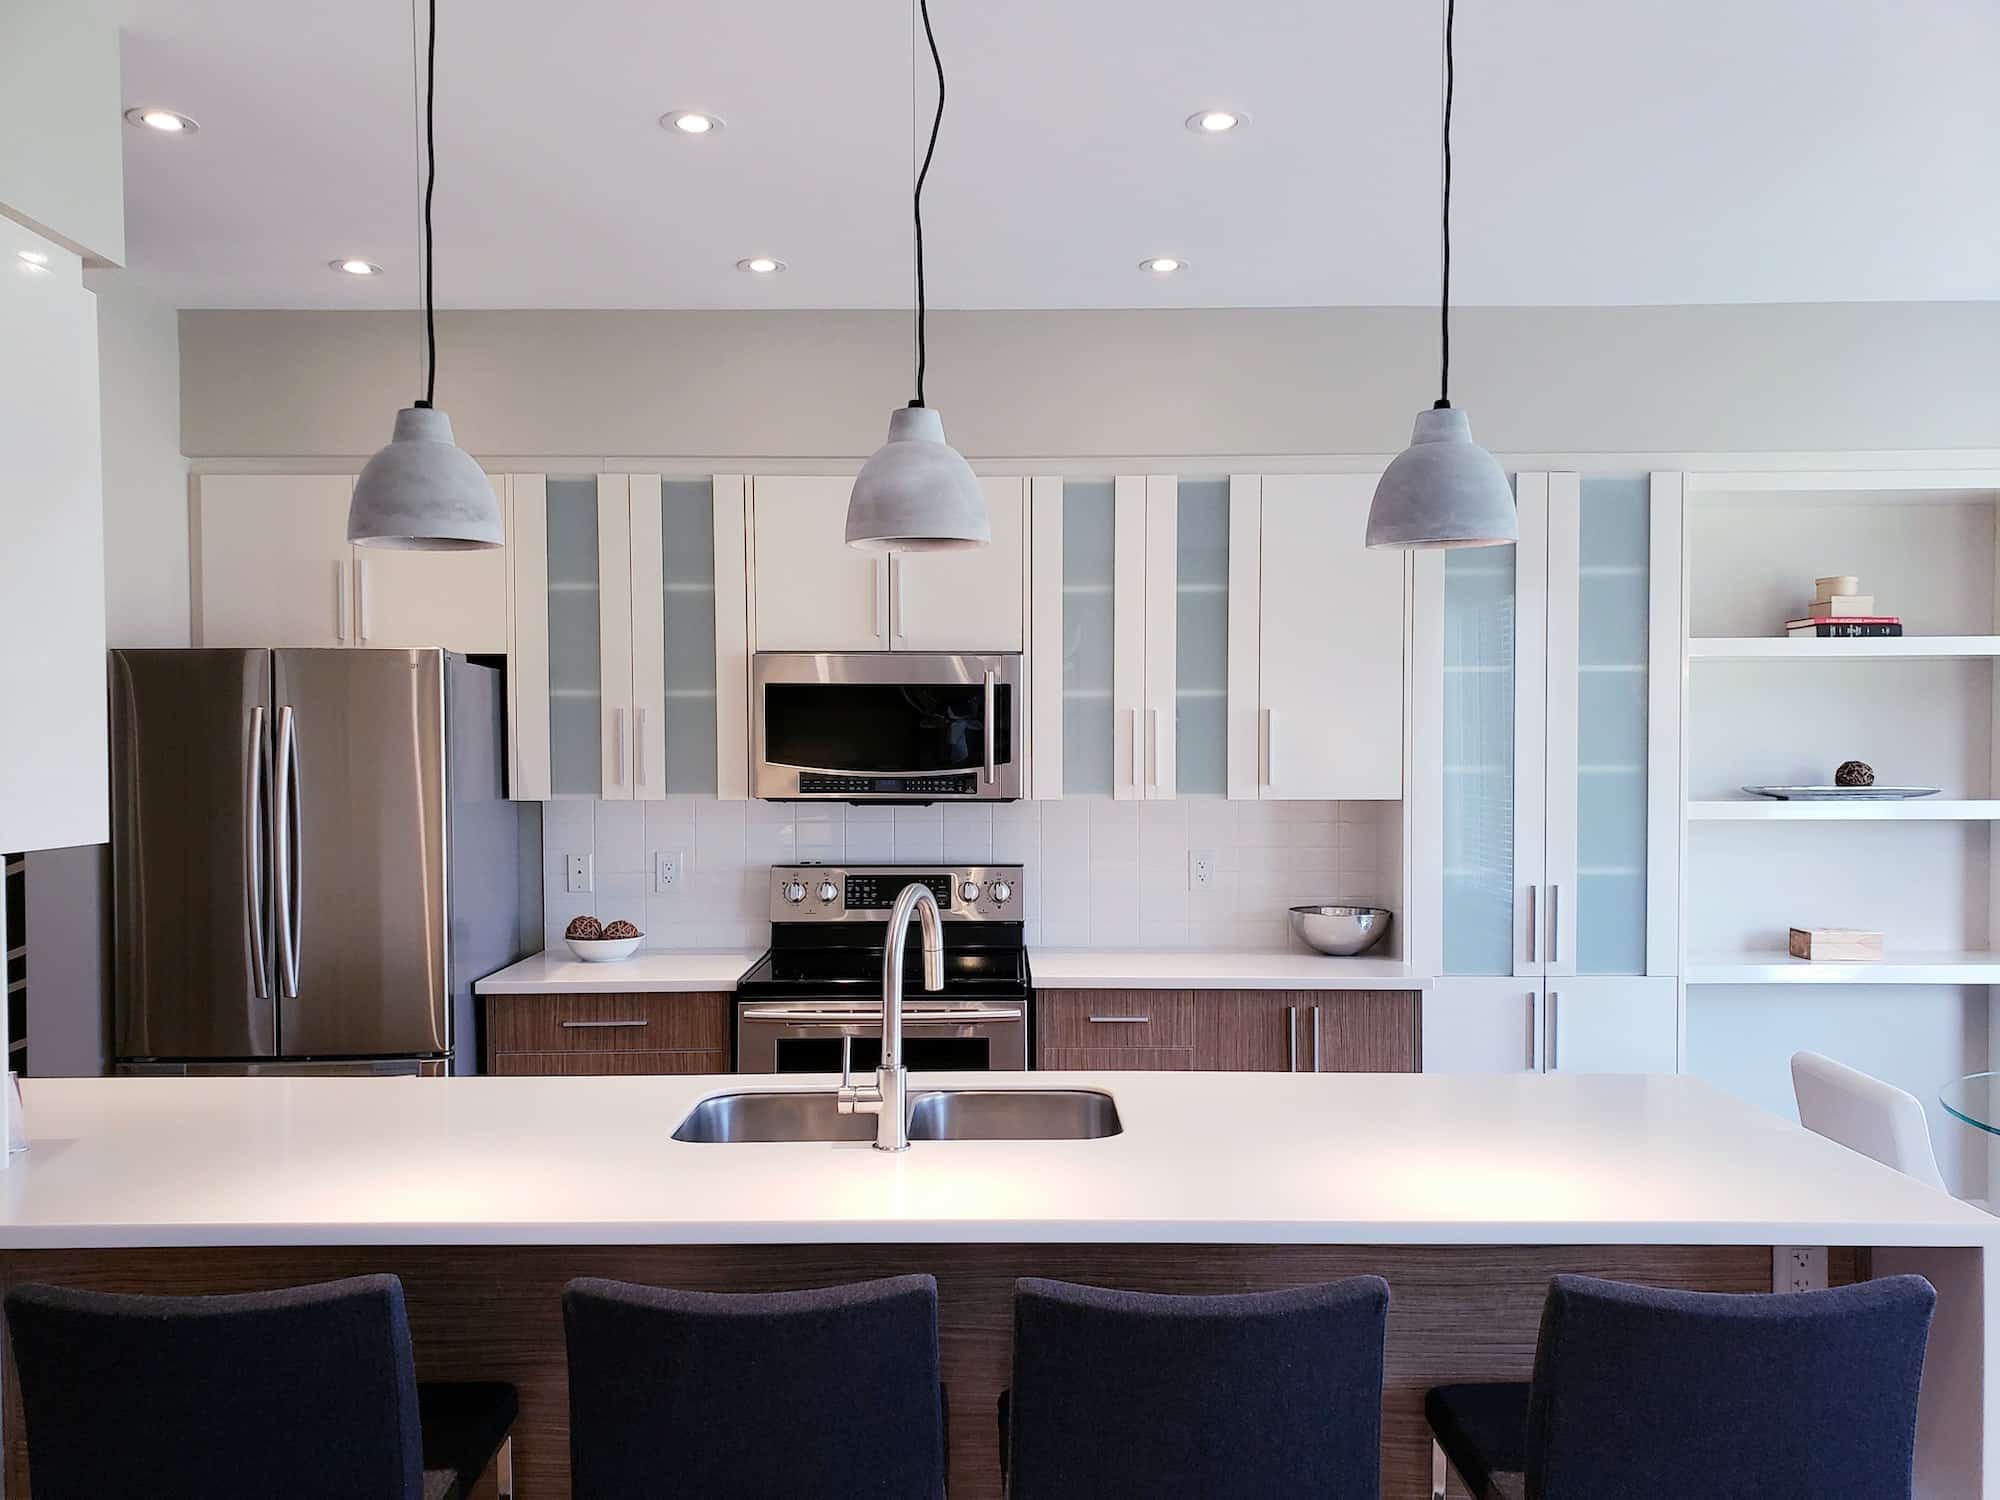 Modern design kitchen cabinets in white and tinted glass, quartz countertop, lights fixtures